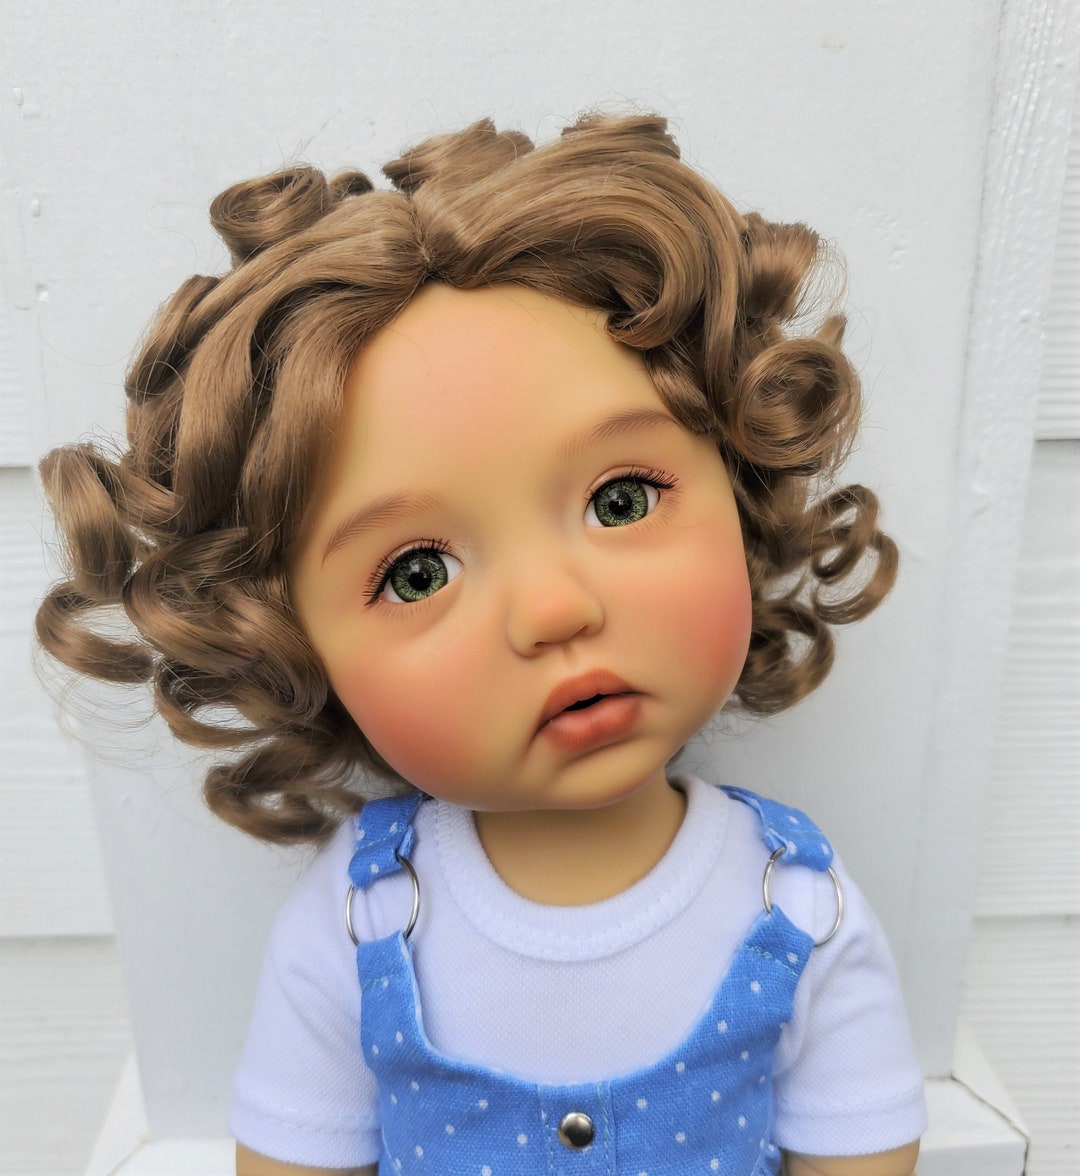 Monique Doll Wig Size 12-13 MARIANNE IN 4 Colors - Etsy